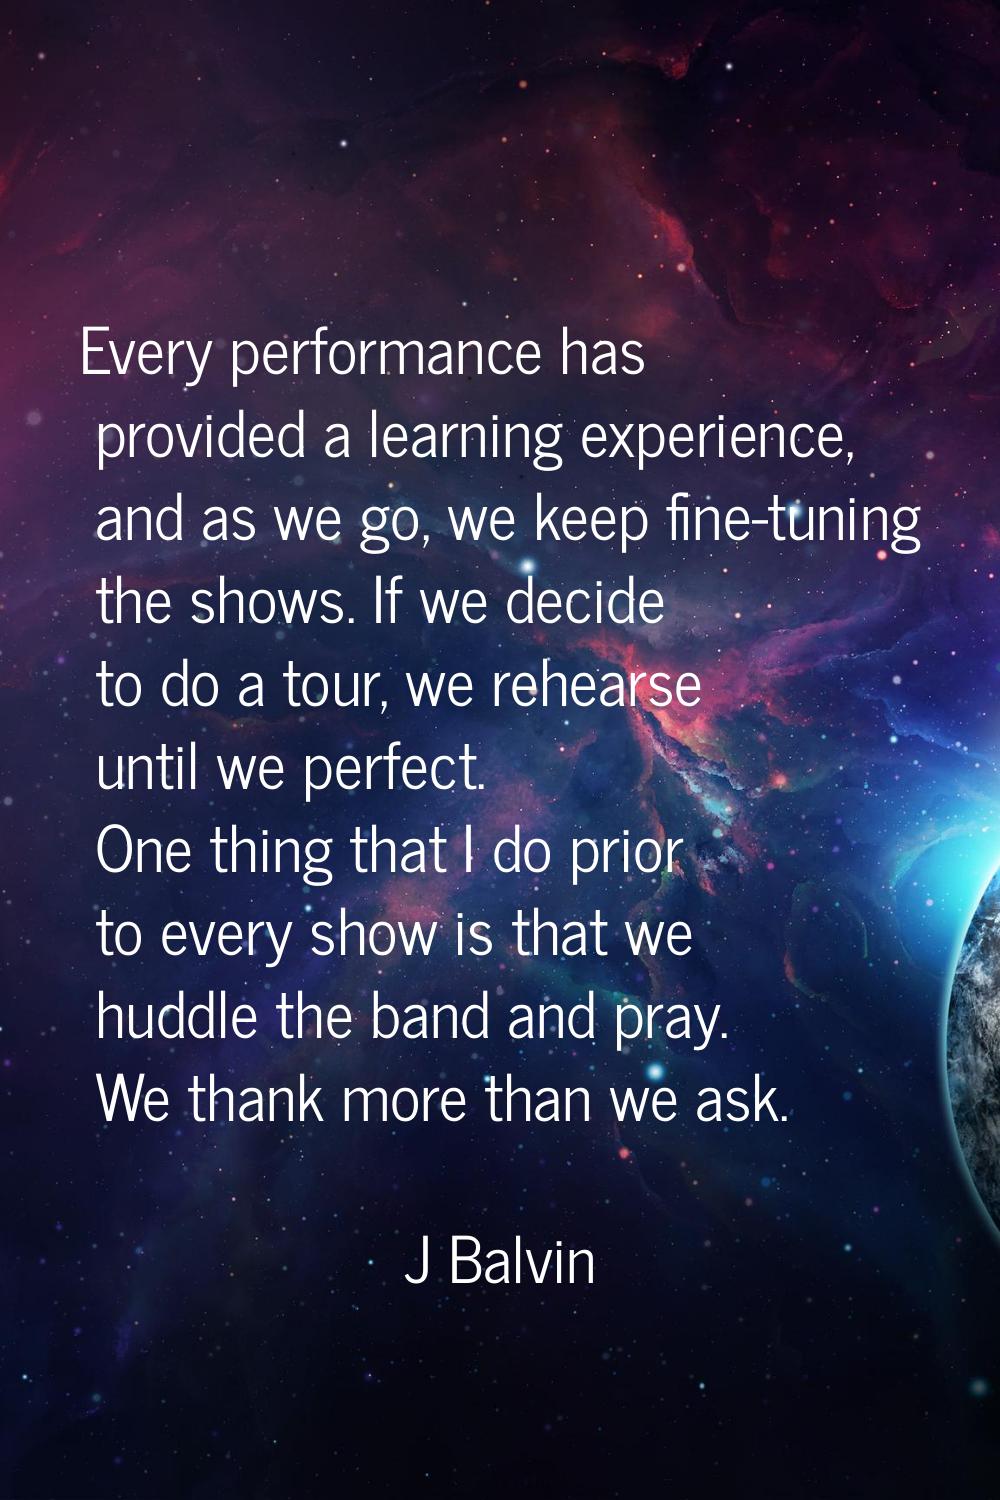 Every performance has provided a learning experience, and as we go, we keep fine-tuning the shows. 